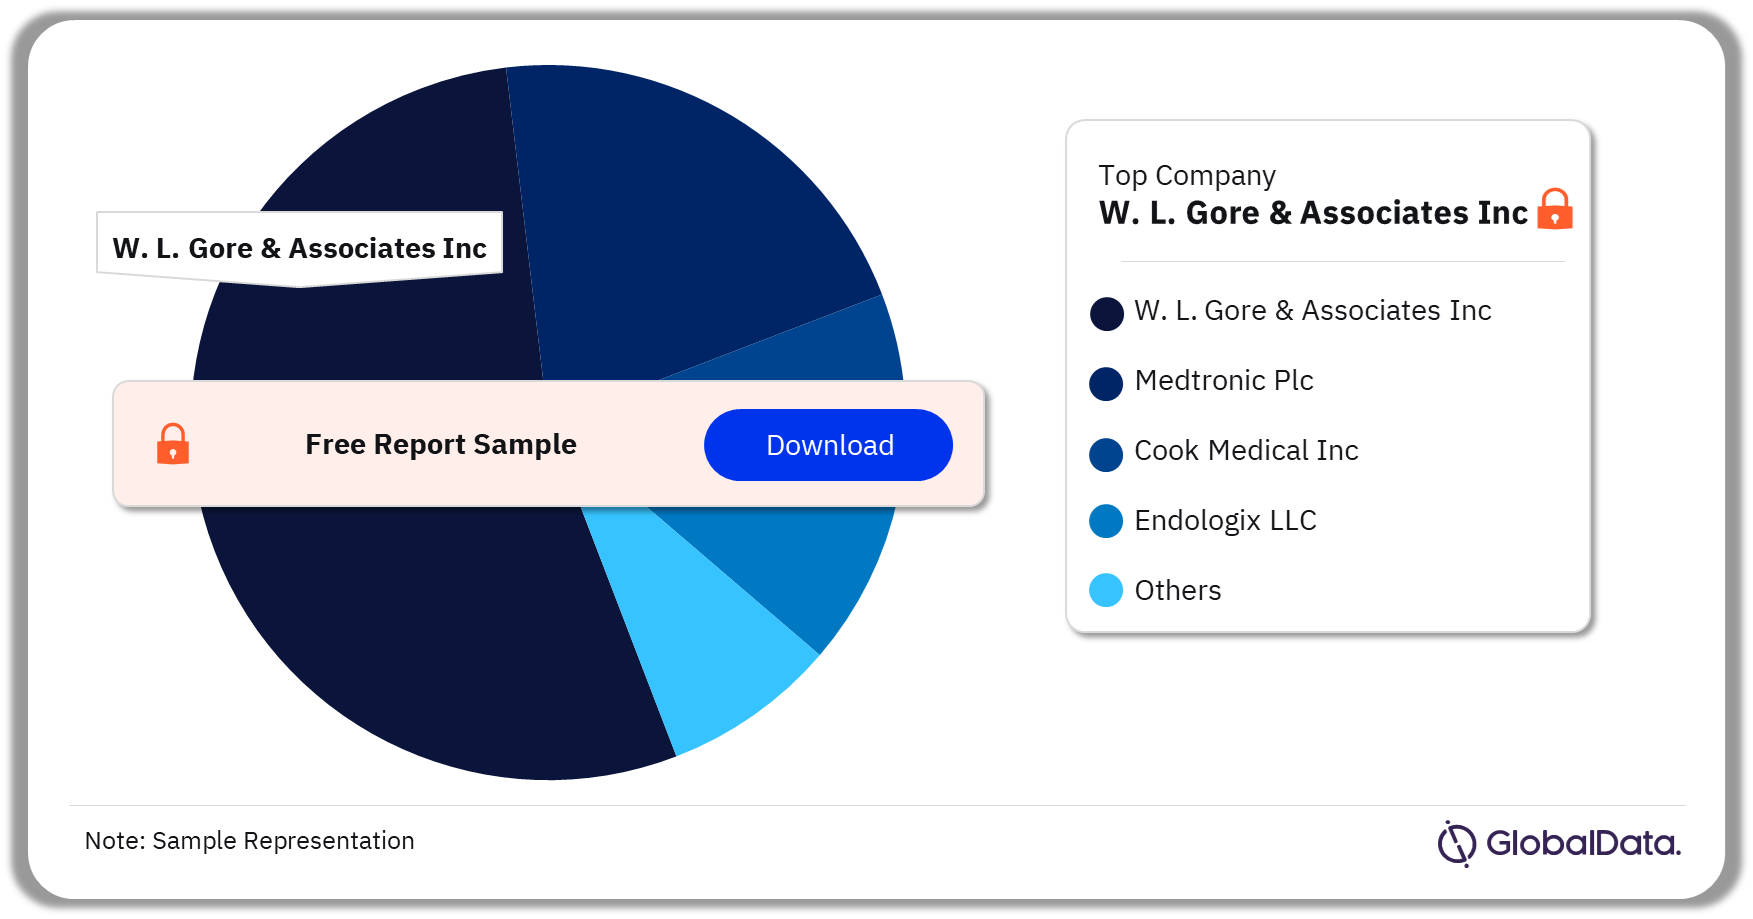 Aortic Stent Grafts Market Analysis by Companies, 2023 (%)